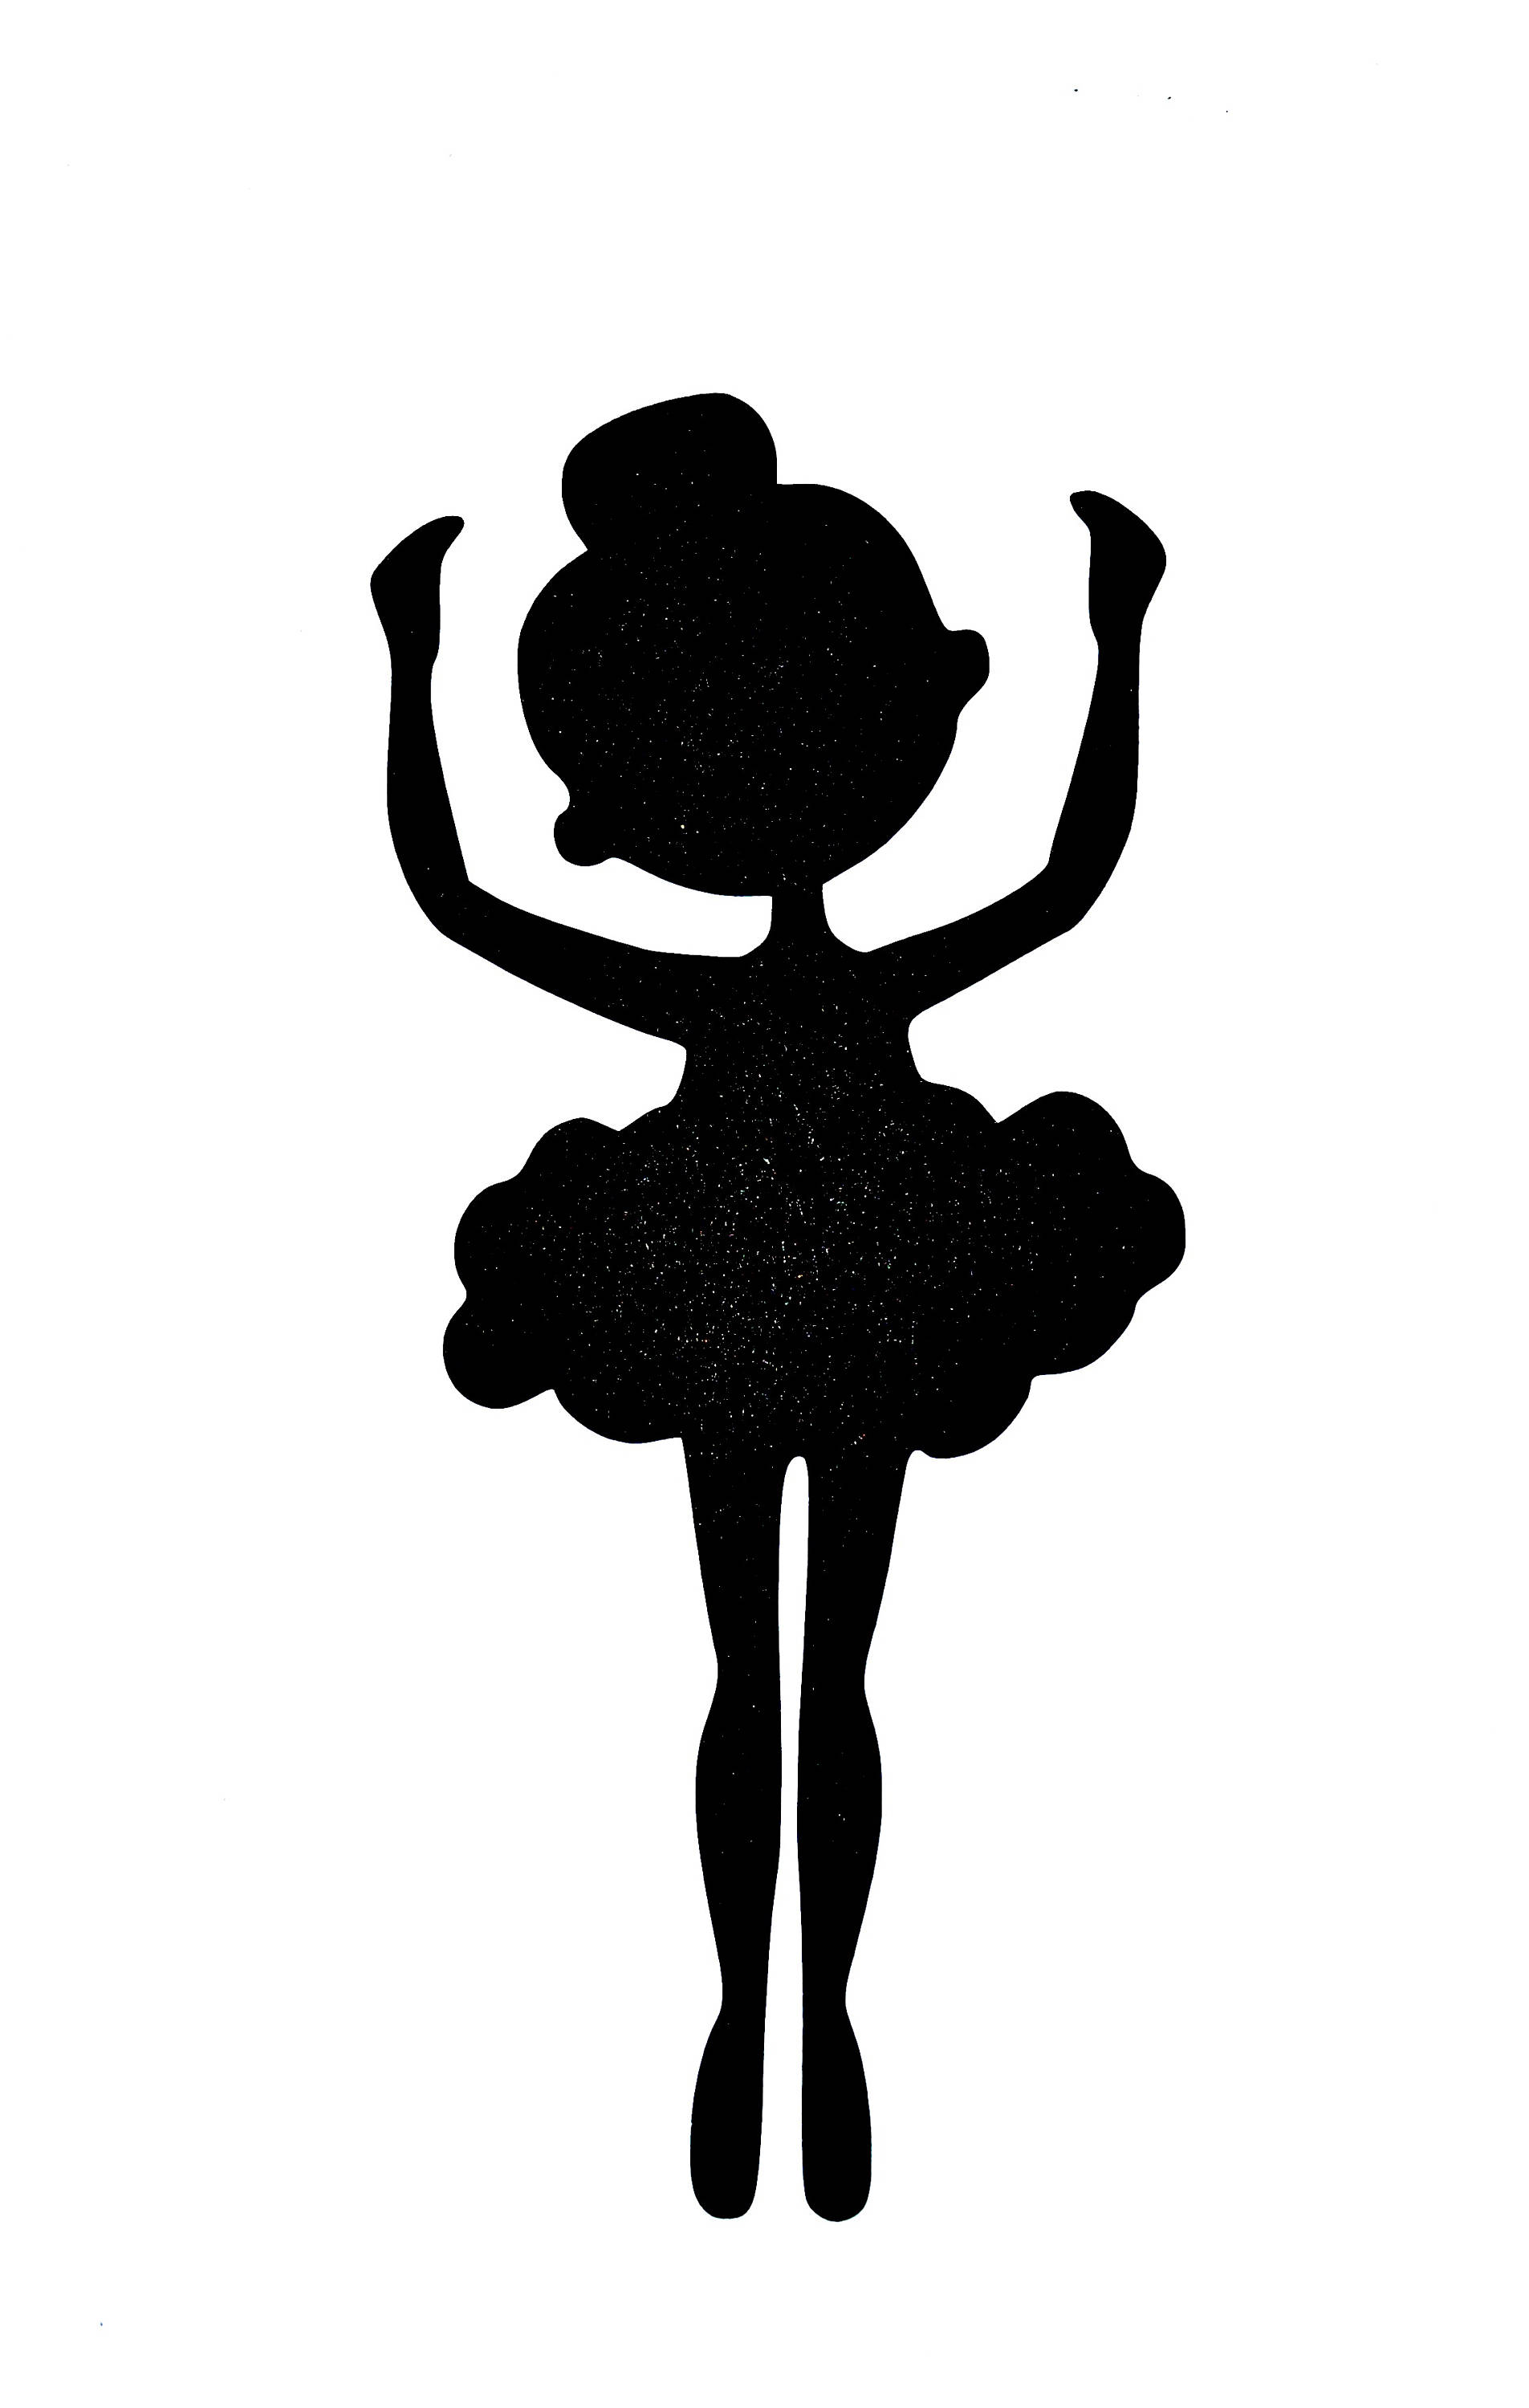 the-best-free-ballerina-silhouette-images-download-from-1067-free